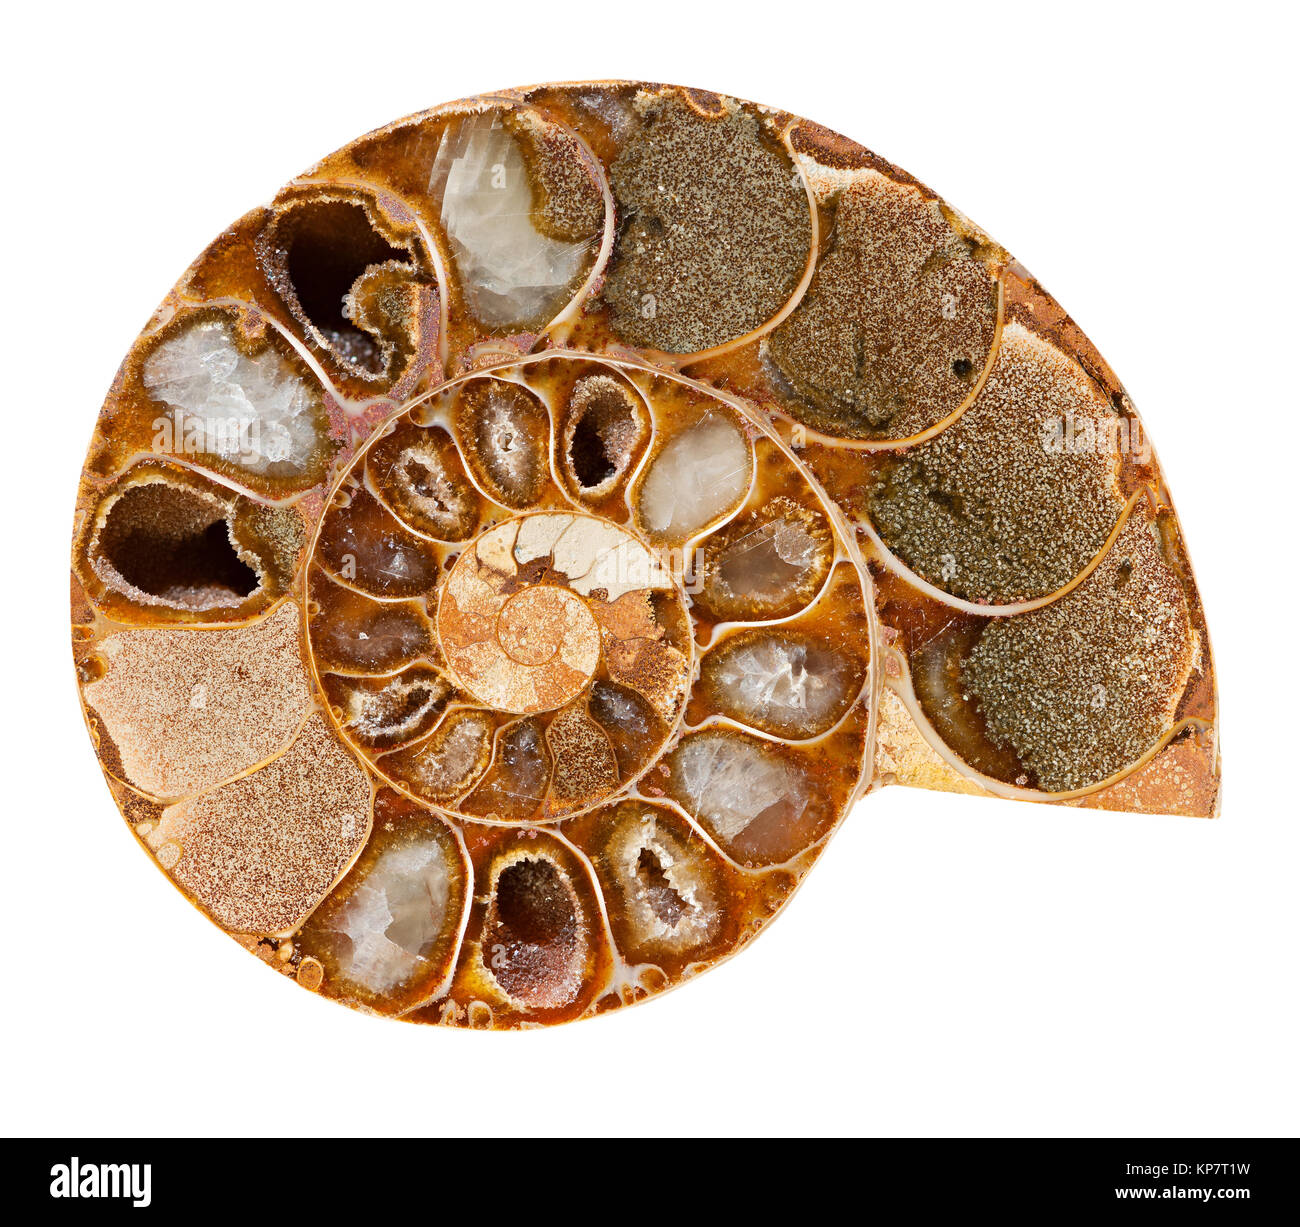 Ammonites ruled the Oceans for 370 million years before mysteriously becoming extinct at the end of the cretaceous period. Ammonites had a head with m Stock Photo